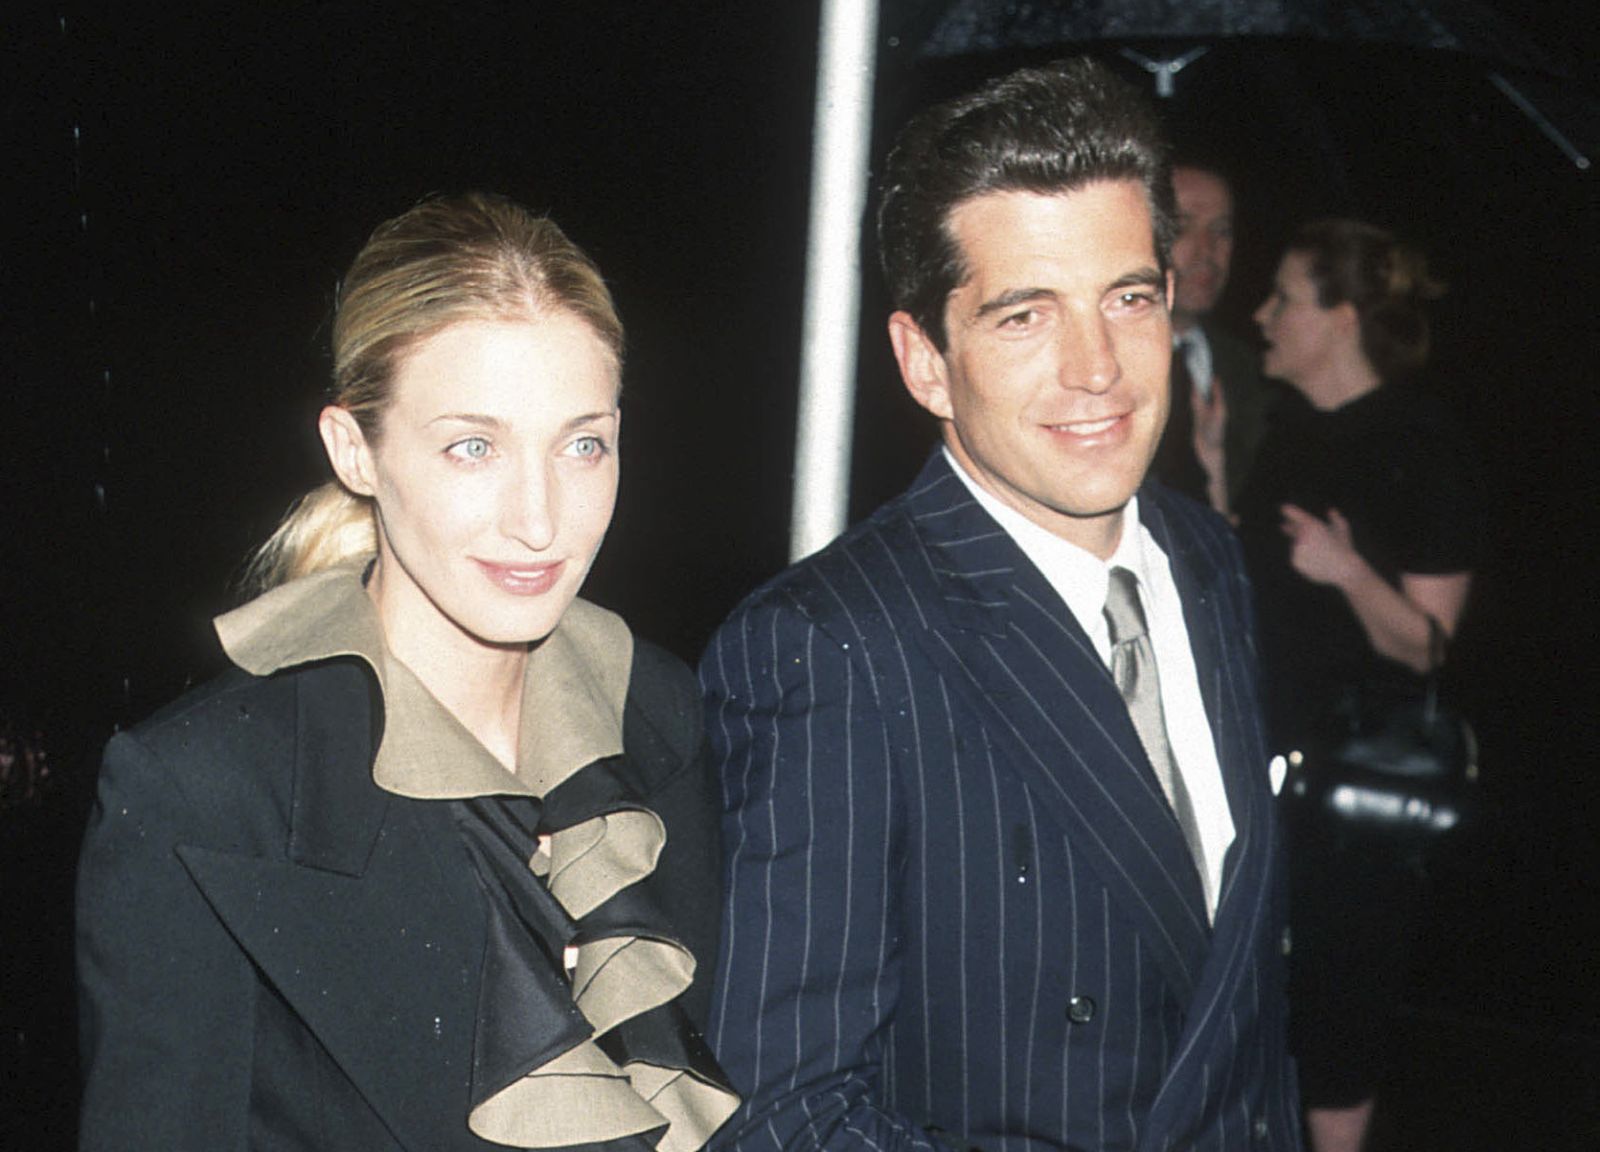 JULY 16th 2023: The twenty four year anniversary of the death of John F. Kennedy Jr. who died in a plane crash on July 16th 1999 along with his wife, Carolyn Bessette Kennedy and his sister-in-law, Lauren Bessette. Kennedy was piloting a single-engine Piper Saratoga that had departed New Jersey's Essex County Airport en route to Martha's Vineyard Airport in Massachusetts. The crash occurred in The Atlantic Ocean approximately 7.5 miles west of Martha's Vineyard. - File Photo by: zz/Larry Le Vine/STAR MAX/IPx 1999 5/19/99 John F. Kennedy Jr. and his wife Carolyn Bessette Kennedy at the "Newman's Own" George Awards held at on May 19, 1999 at The U.S. Customs House in New York City. (NYC)